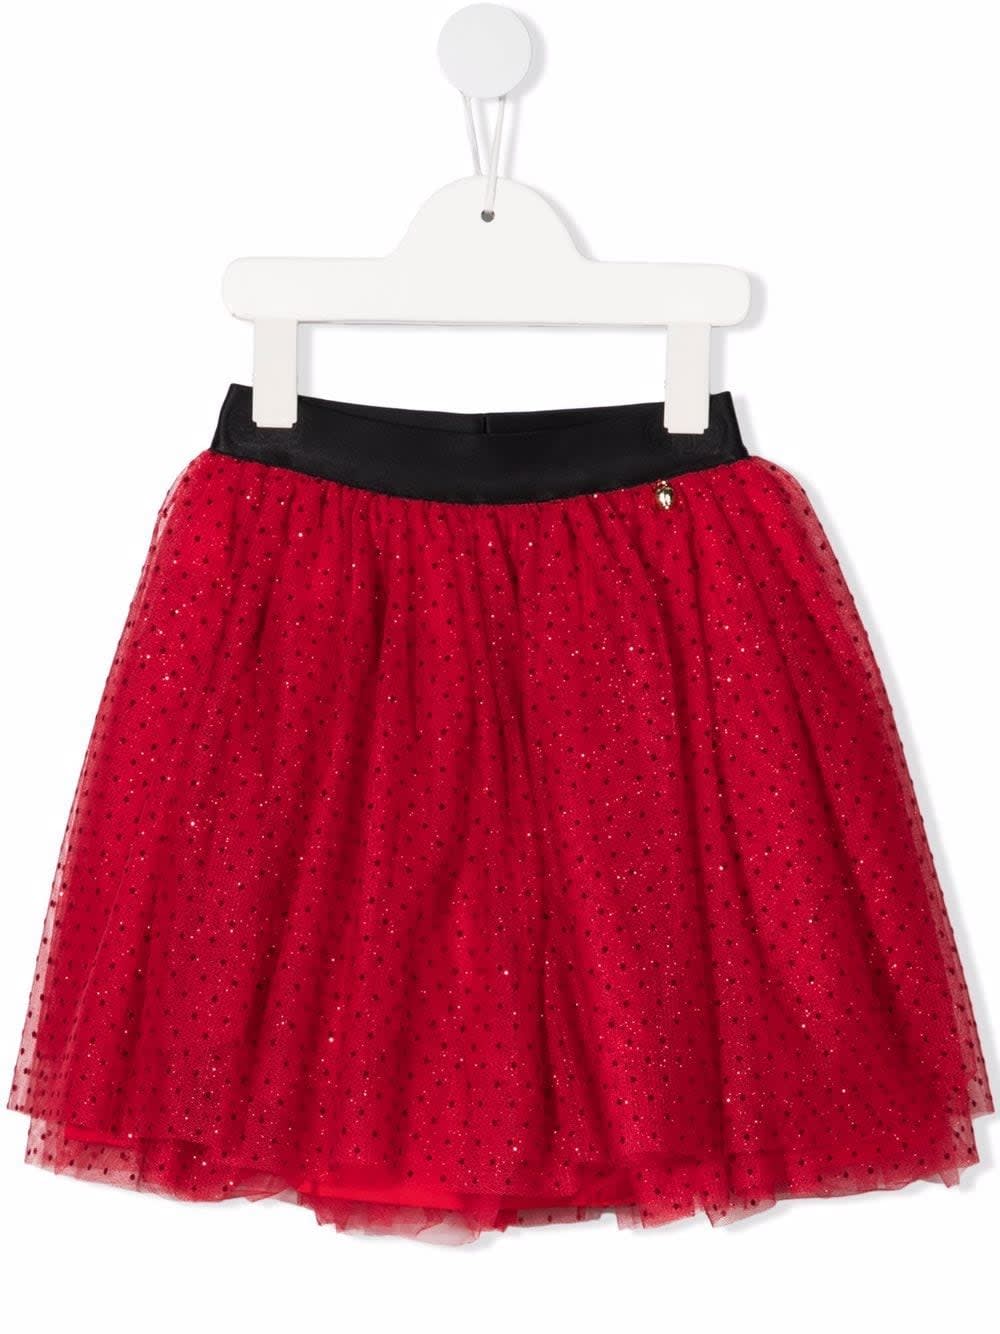 Simonetta Kids Shirt In Red Tulle With Black Polka Dots